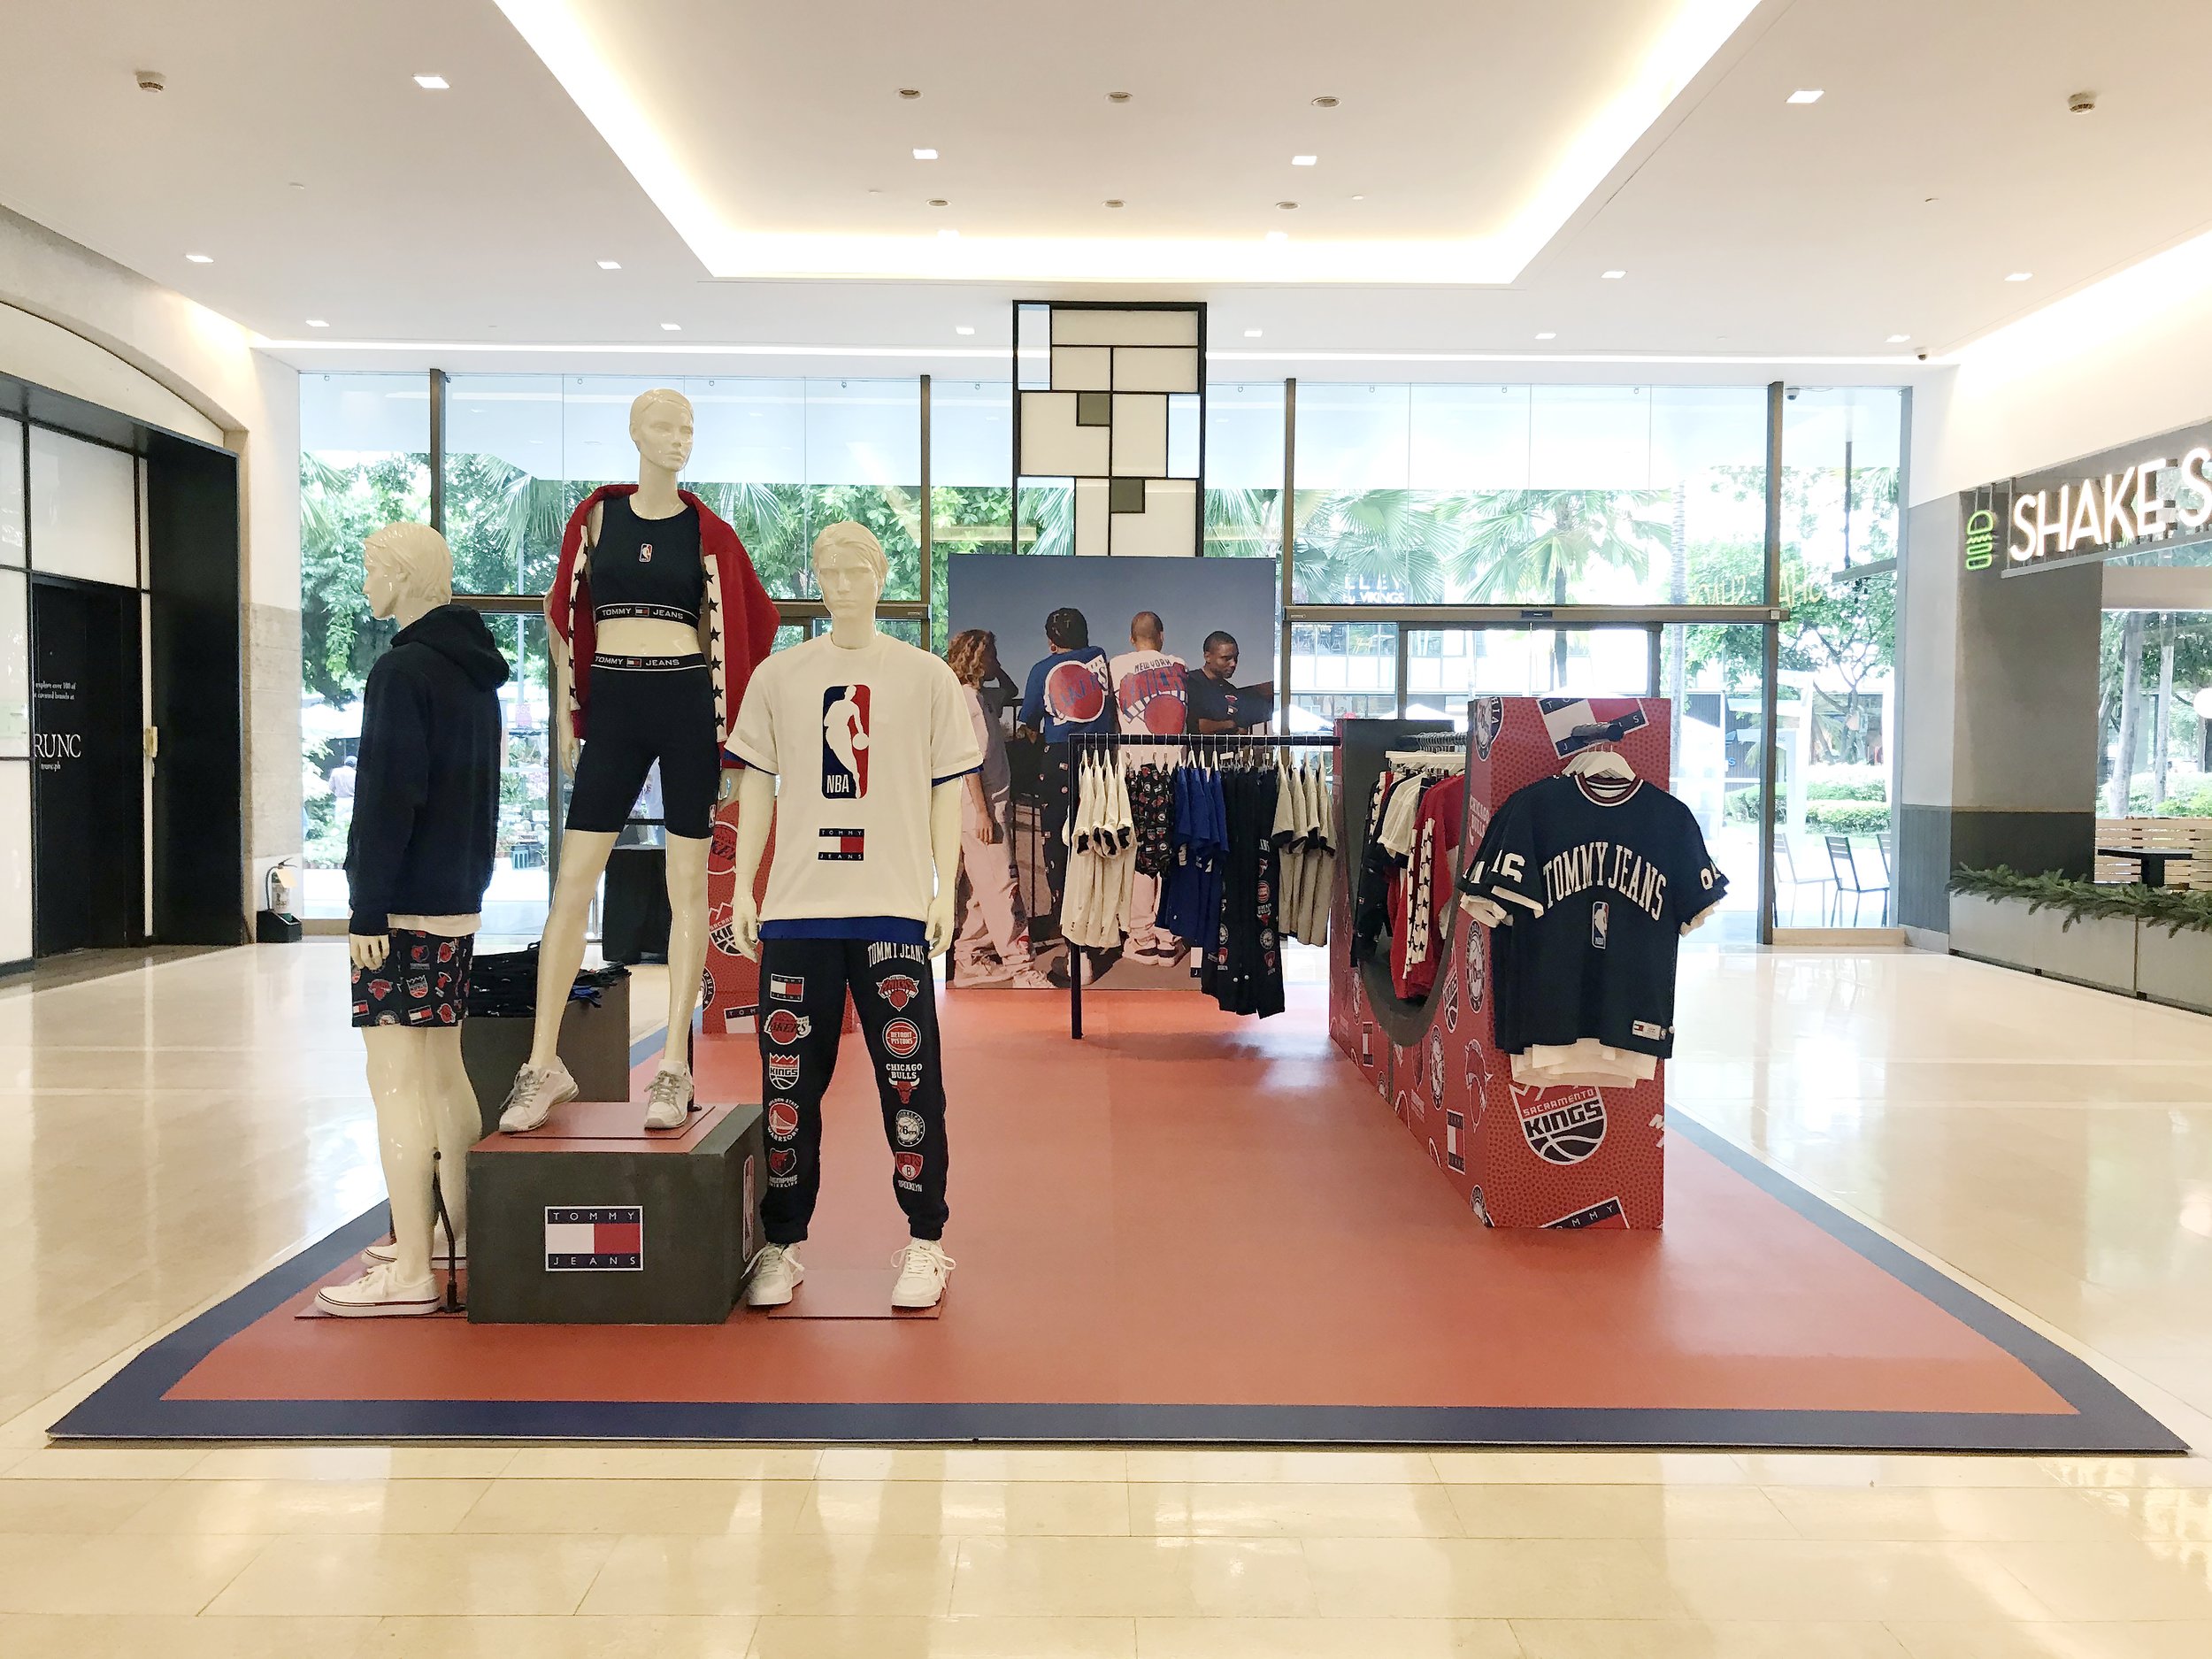 Tommy Hilfiger store at the Fashion Outlets of Chicago mall in